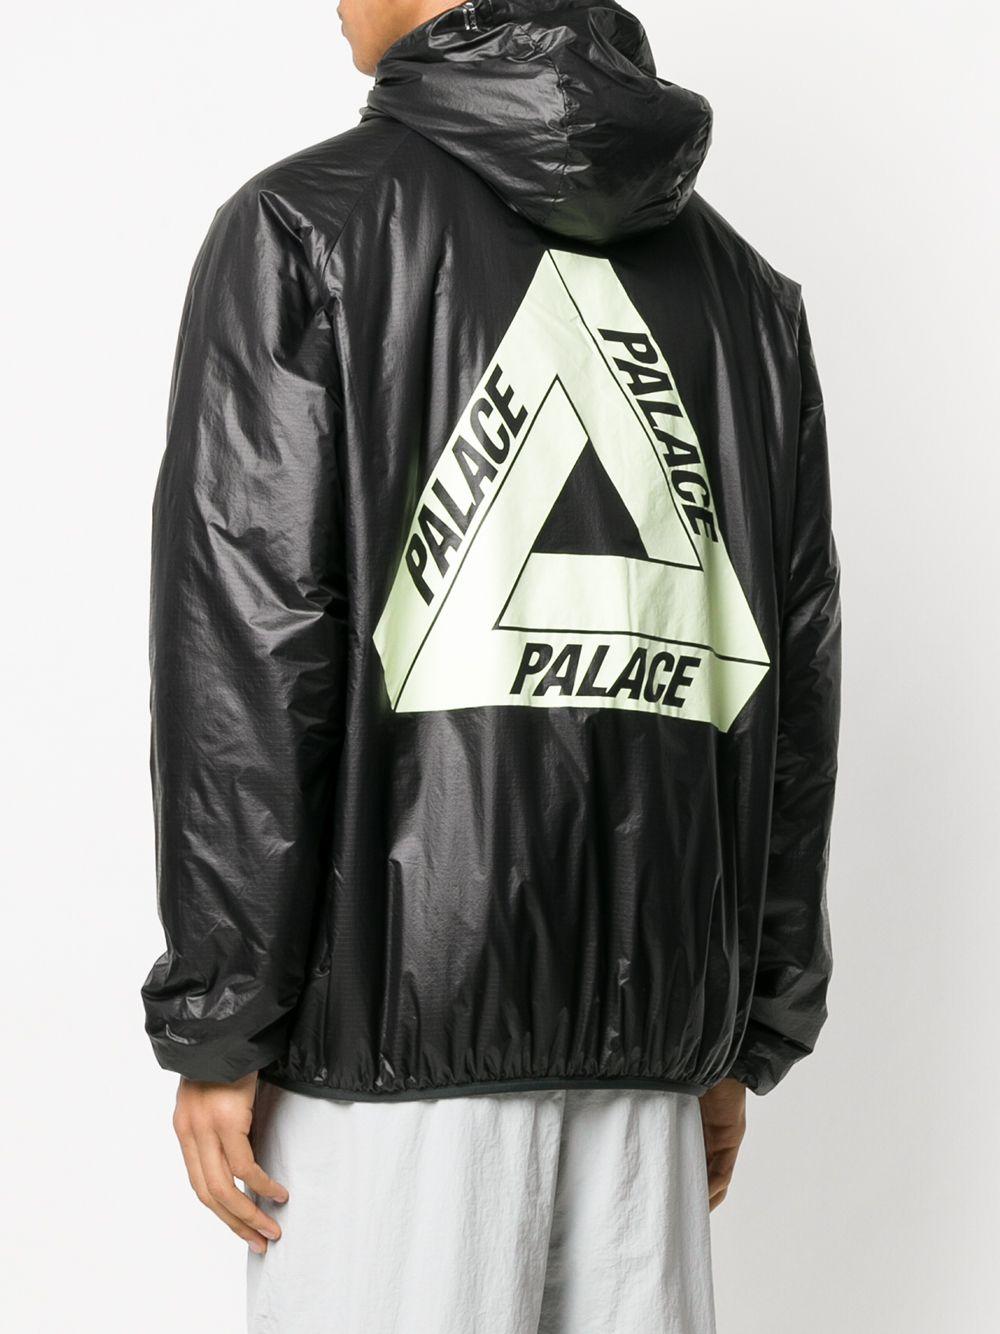 Palace Synthetic Pertex® Quantum Jacket in Black for Men - Lyst